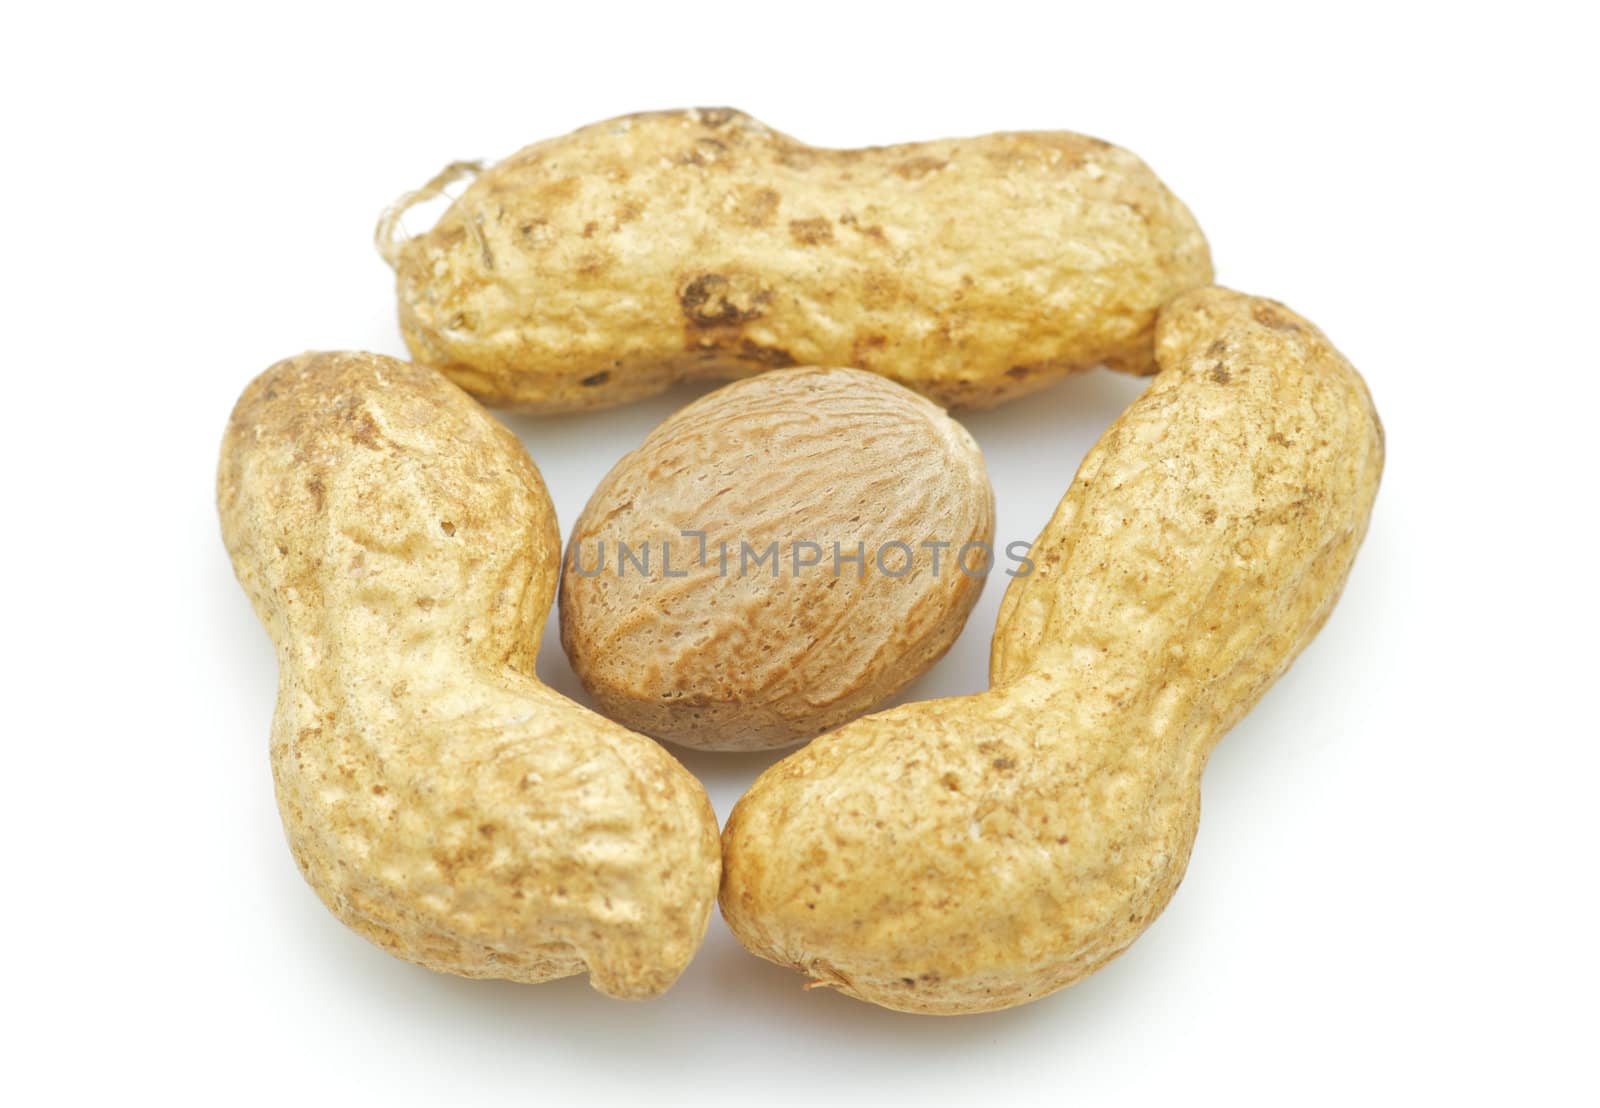 Peanut nuts in a shell isolated on white background